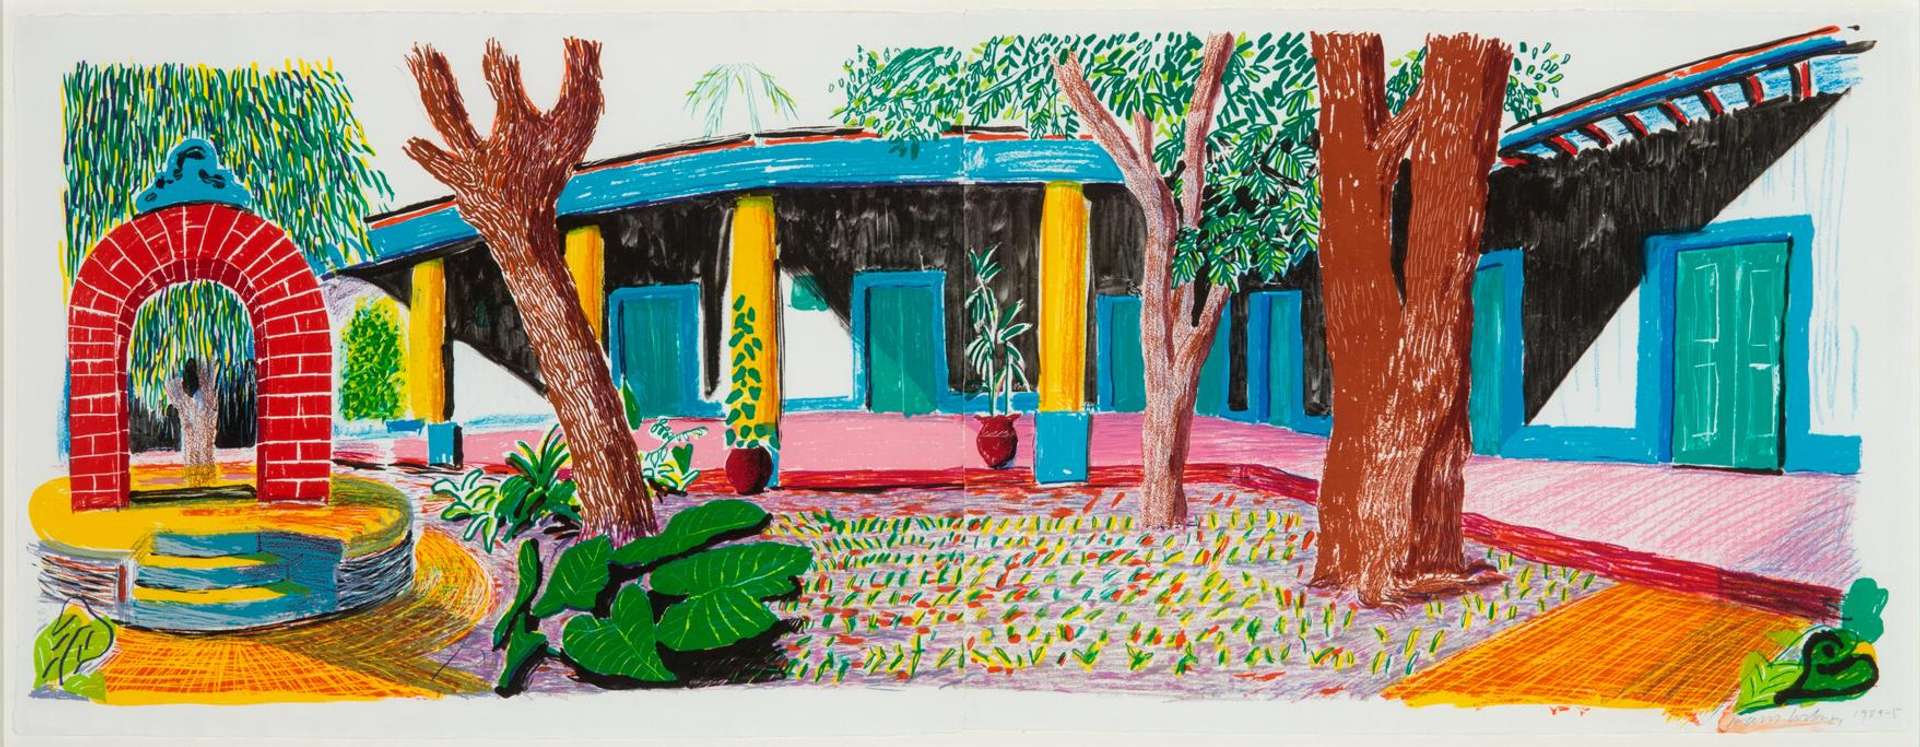 A lithographic print by David Hockney showing a colourful courtyard lined with foliage and architectural elements.